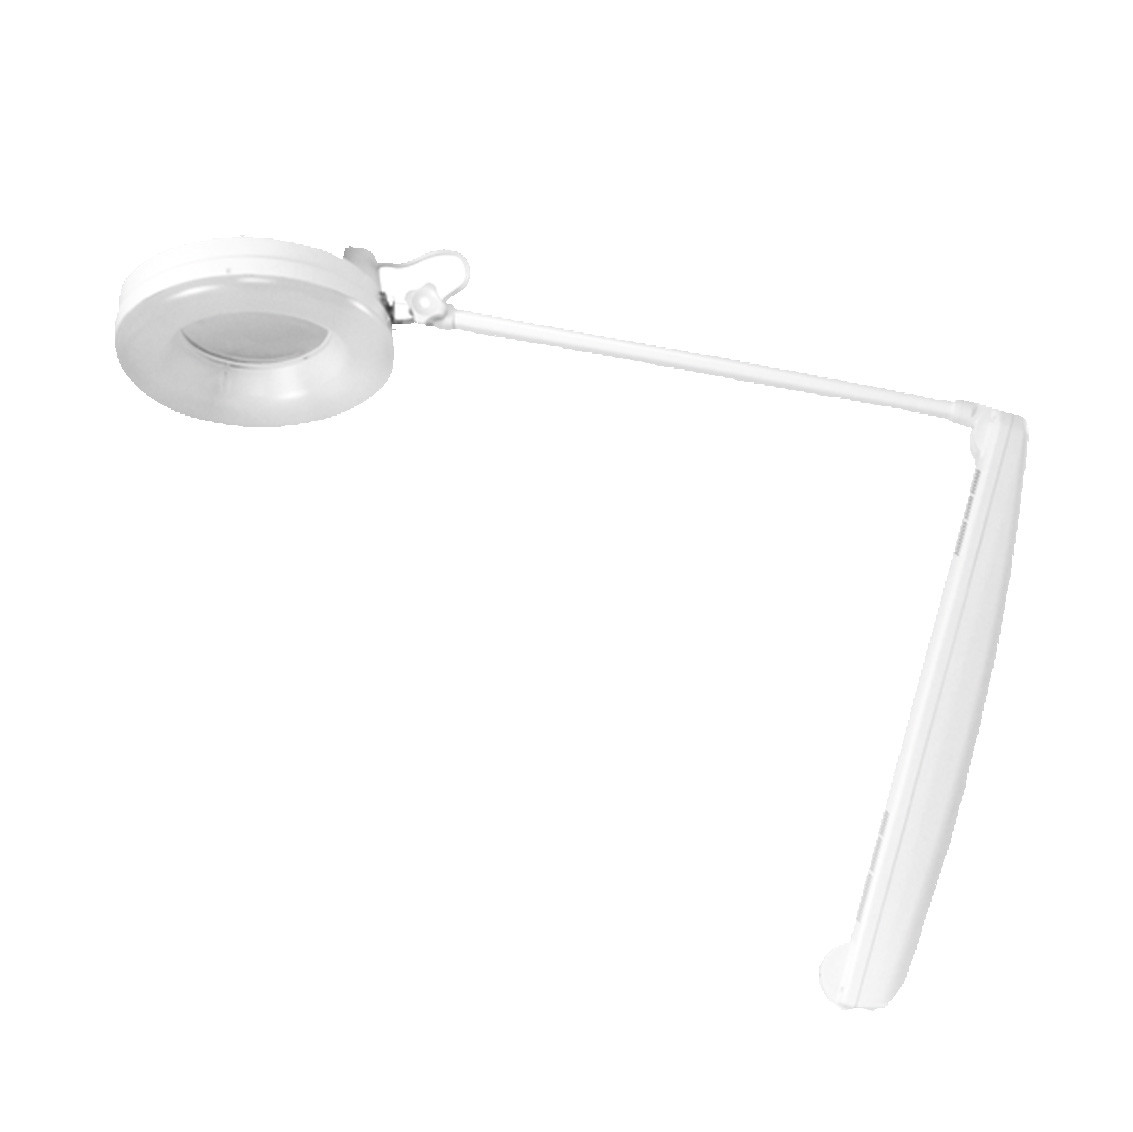 Lampes loupe Afma Evo néon 3 dioptries